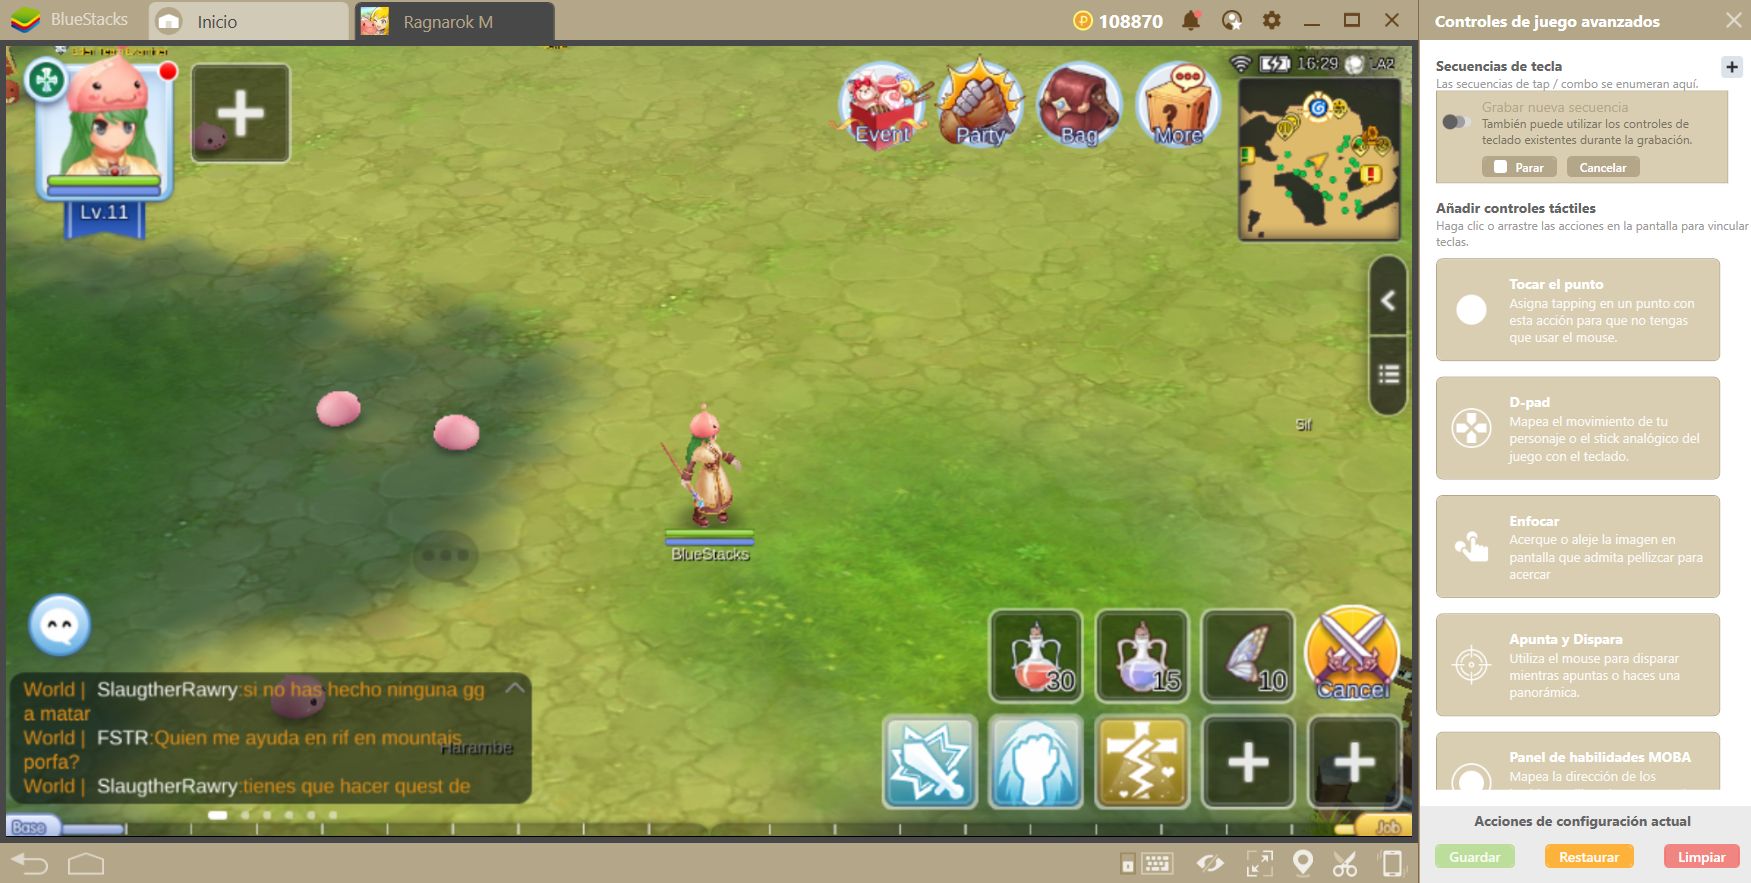 Relive the Classic Online Experience With Ragnarok M: Eternal Love and BlueStacks